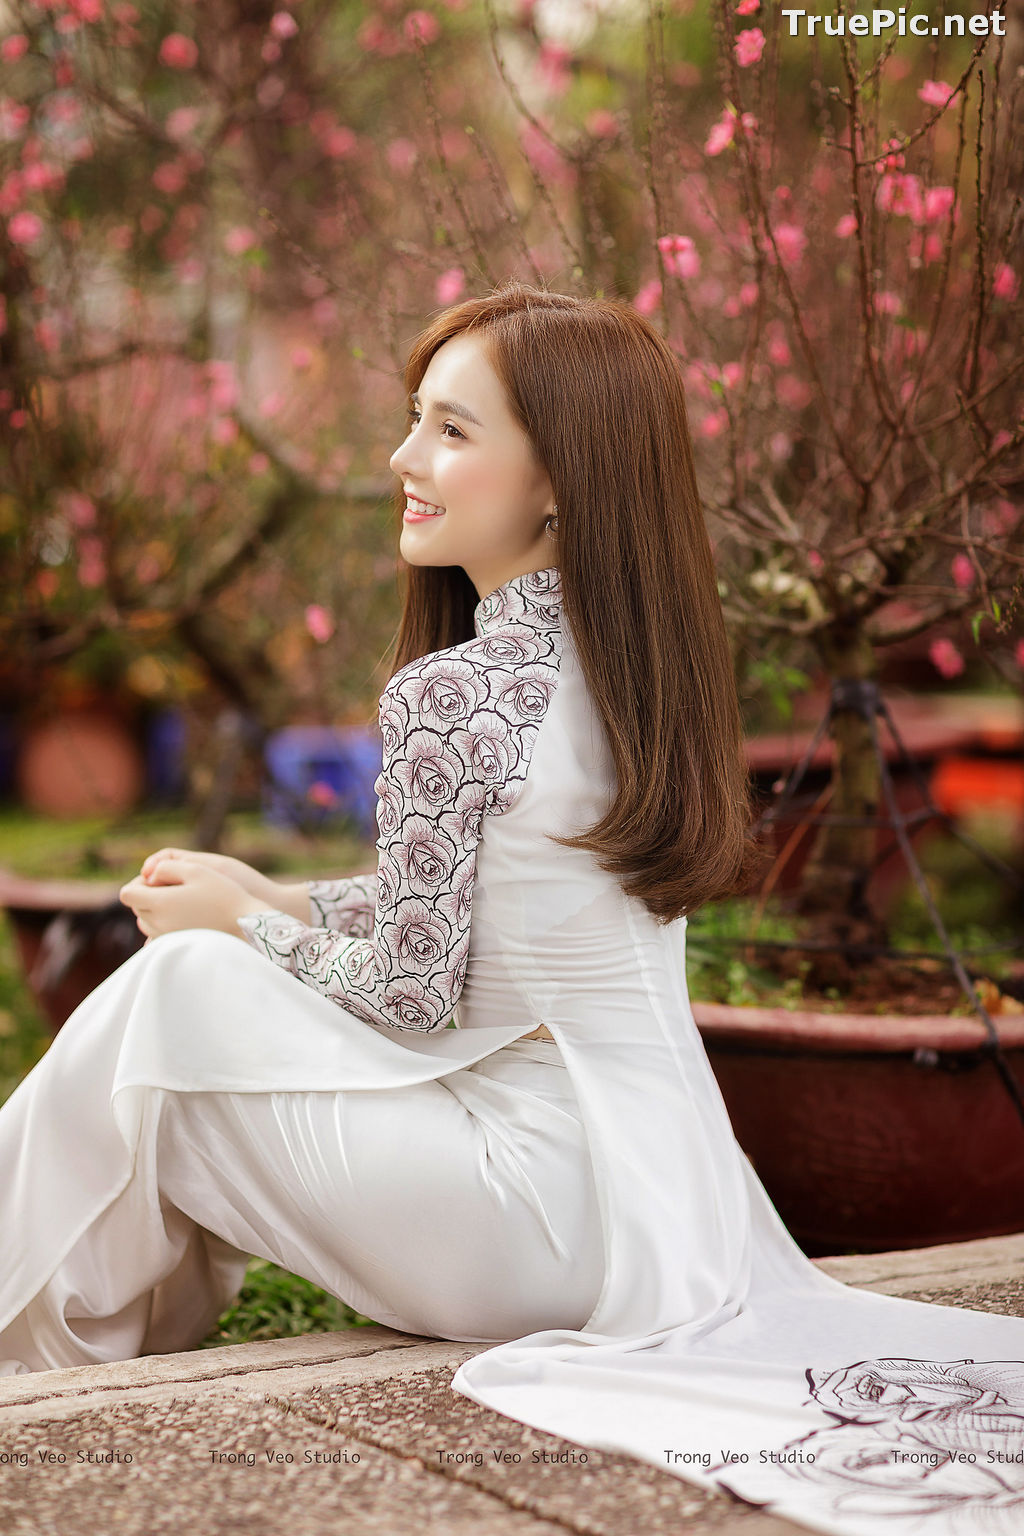 Image The Beauty of Vietnamese Girls with Traditional Dress (Ao Dai) #4 - TruePic.net - Picture-55